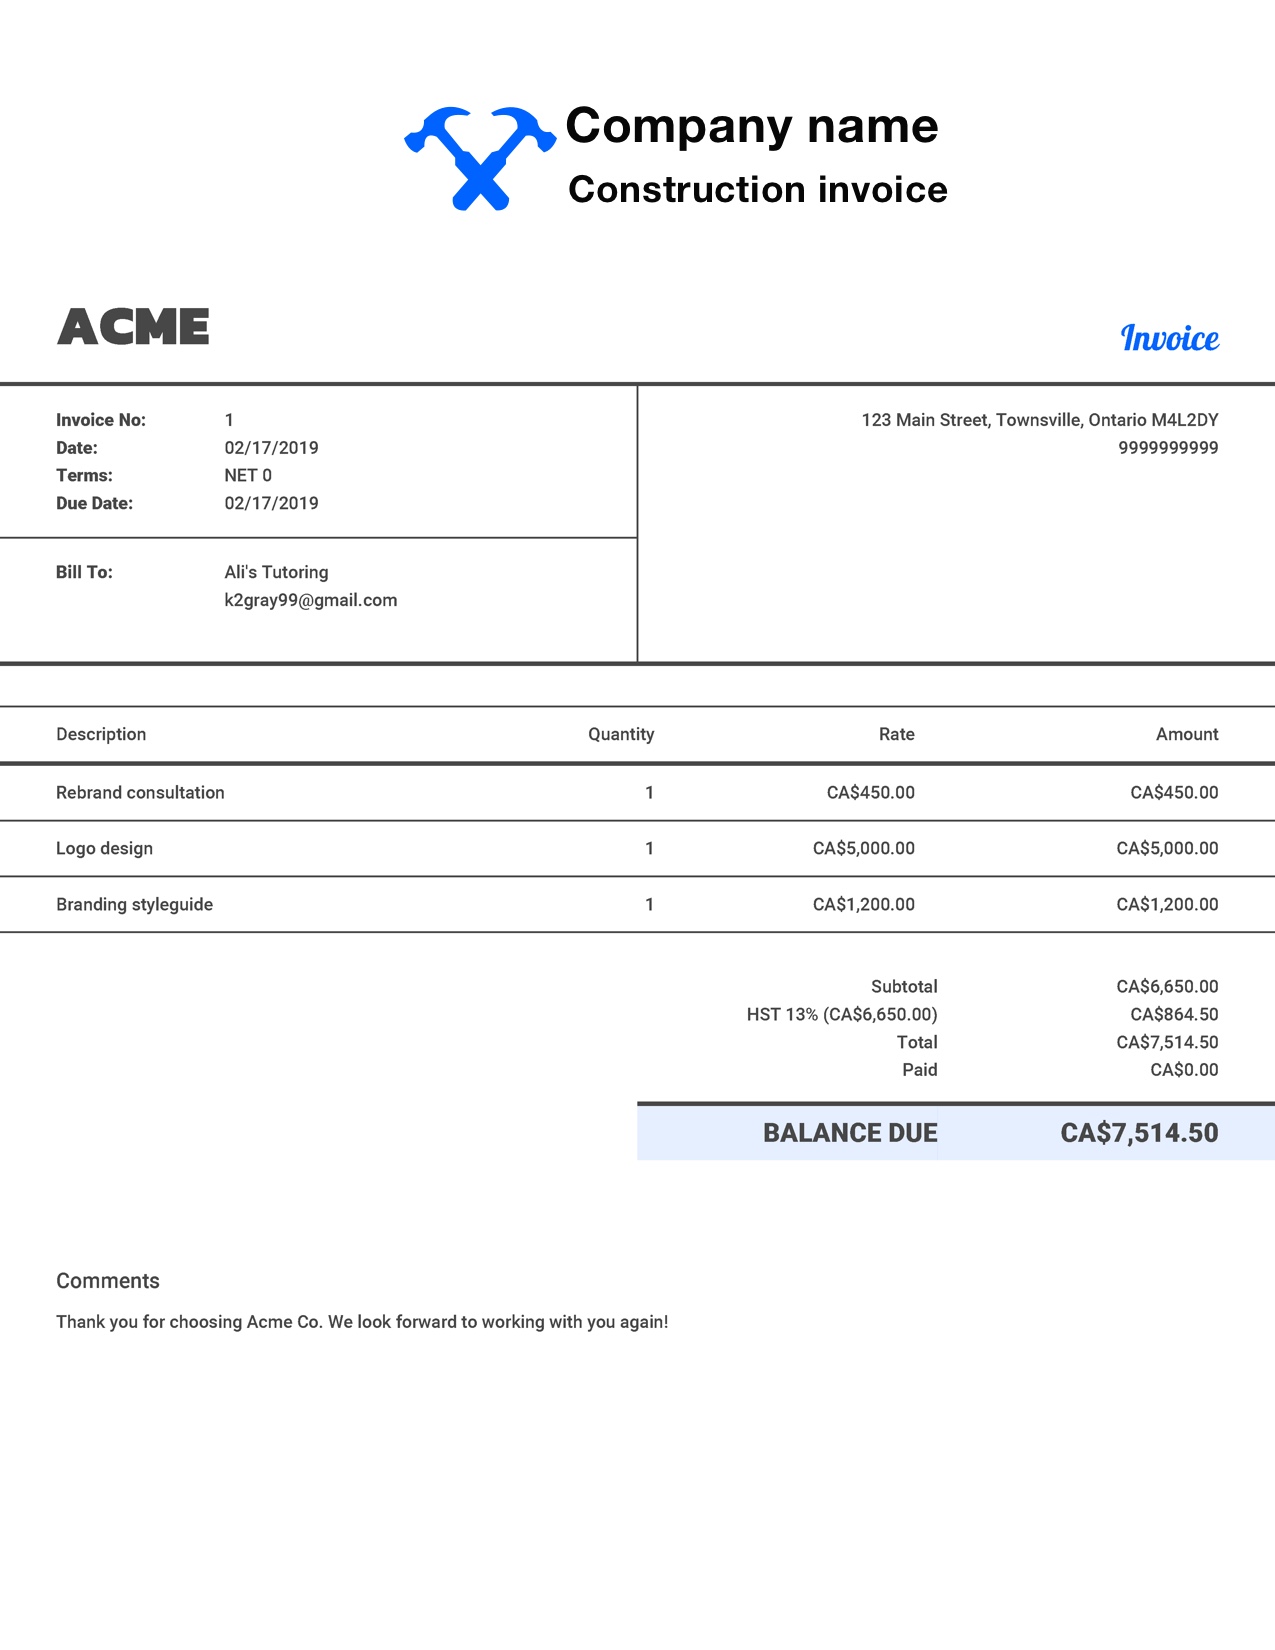 Free Construction Invoice Template. Customize and Send in 90 Seconds